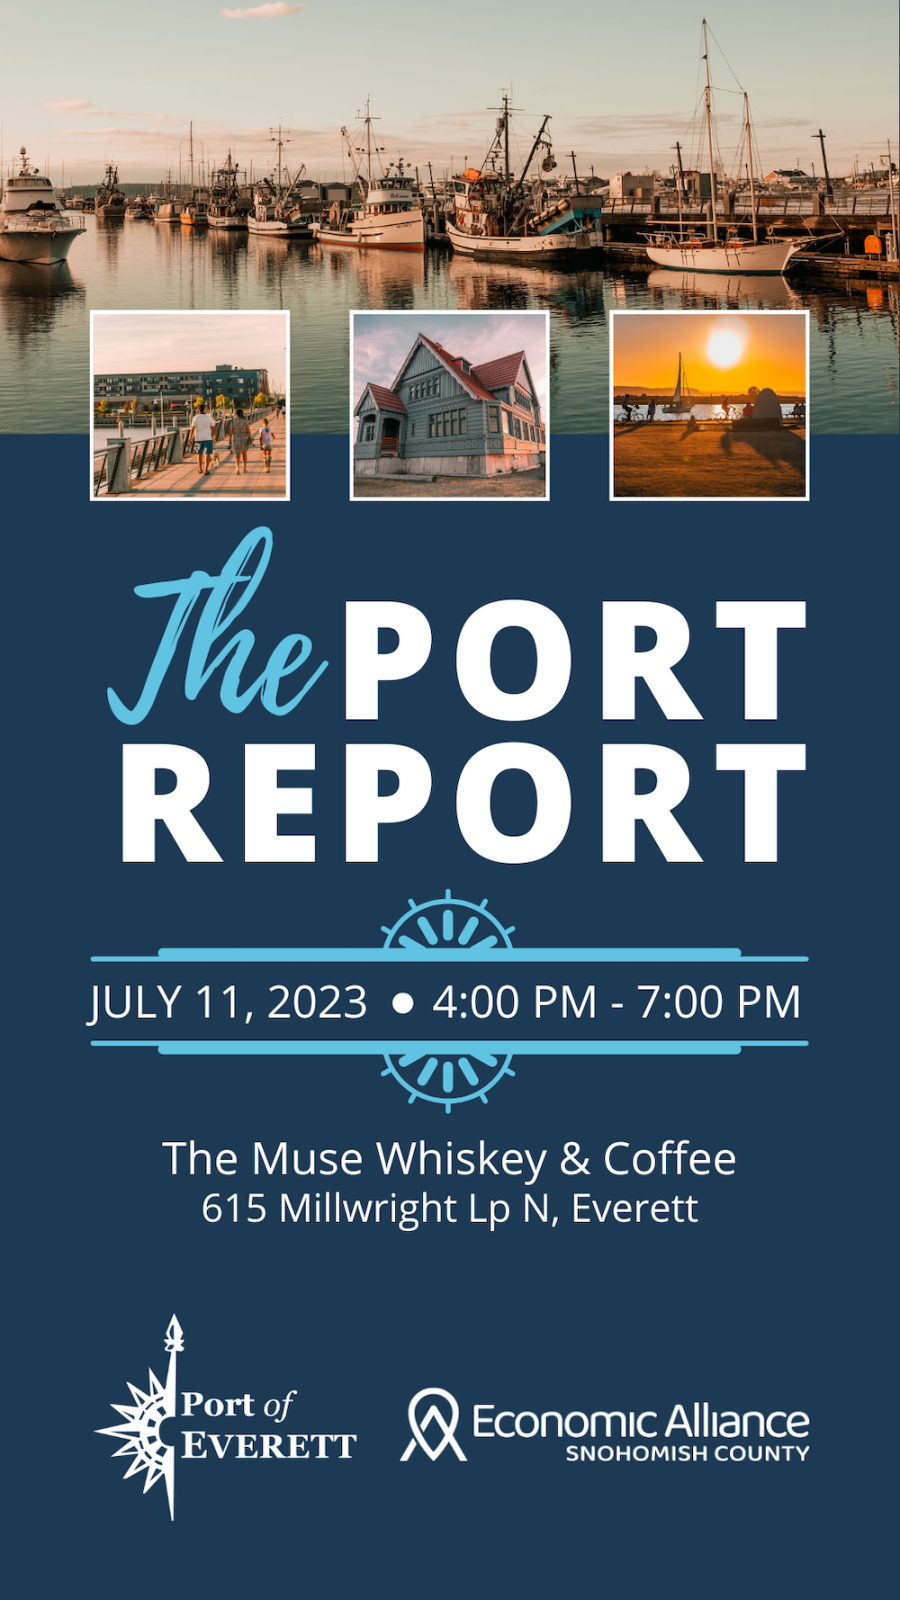 Annual Port Report Coming to Everett Waterfront on July 11 Main Photo